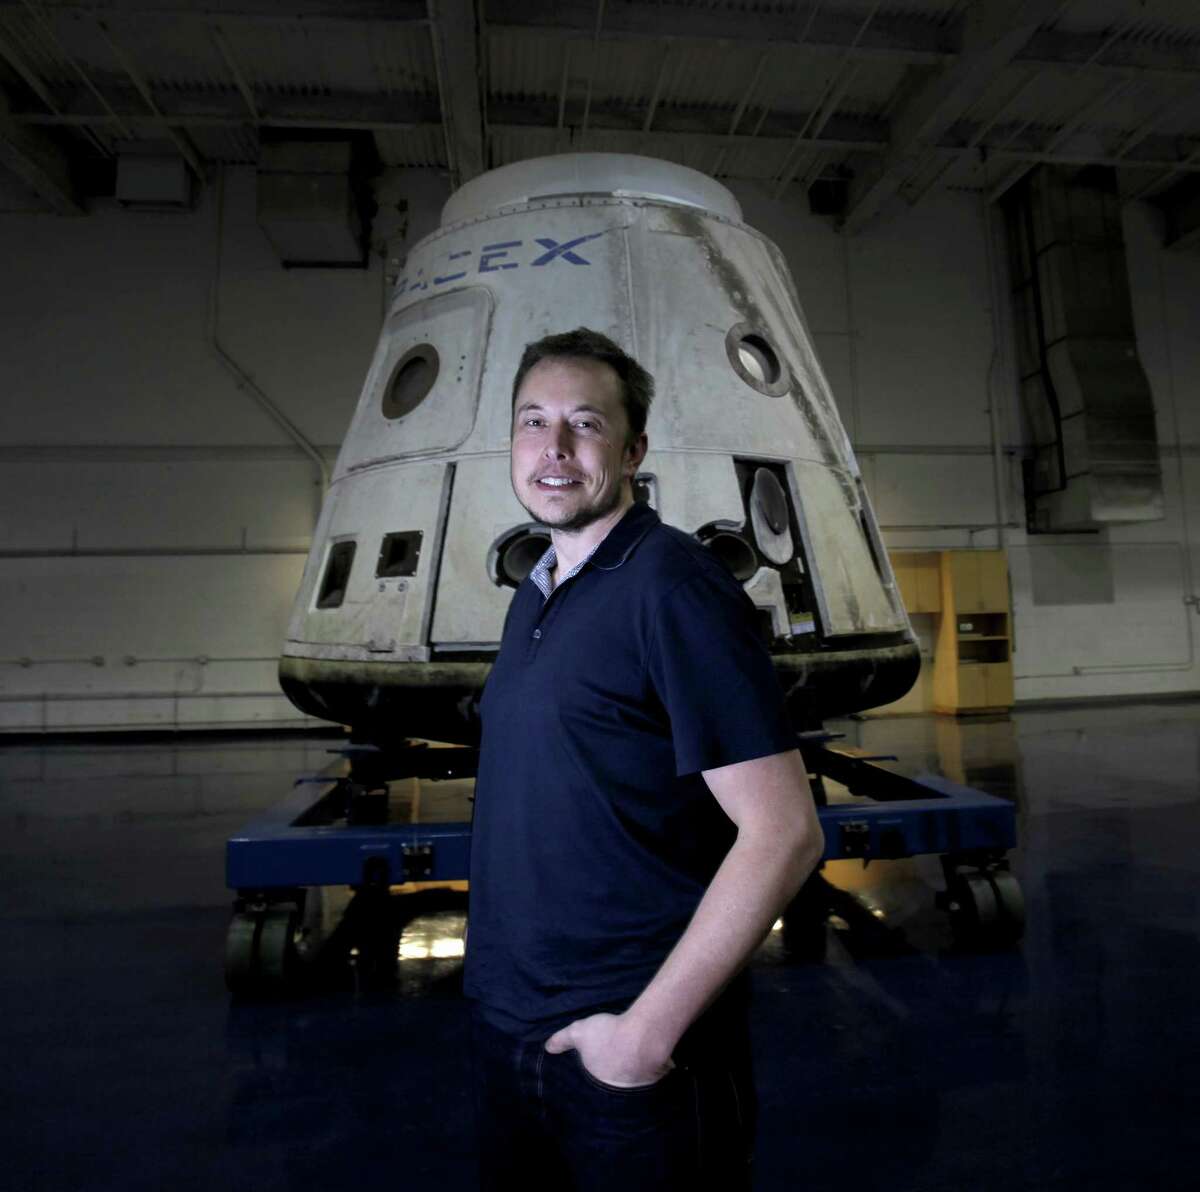 SpaceX founder Elon Musk stands in front of the SpaceX Dragon capsule at Space Exploration Technologies Corp. Musk wouldn’t identify the pair of private citizens who will go fly on next year’s moon mission or the price tag. They’ve already paid a “significant” deposit, he noted.